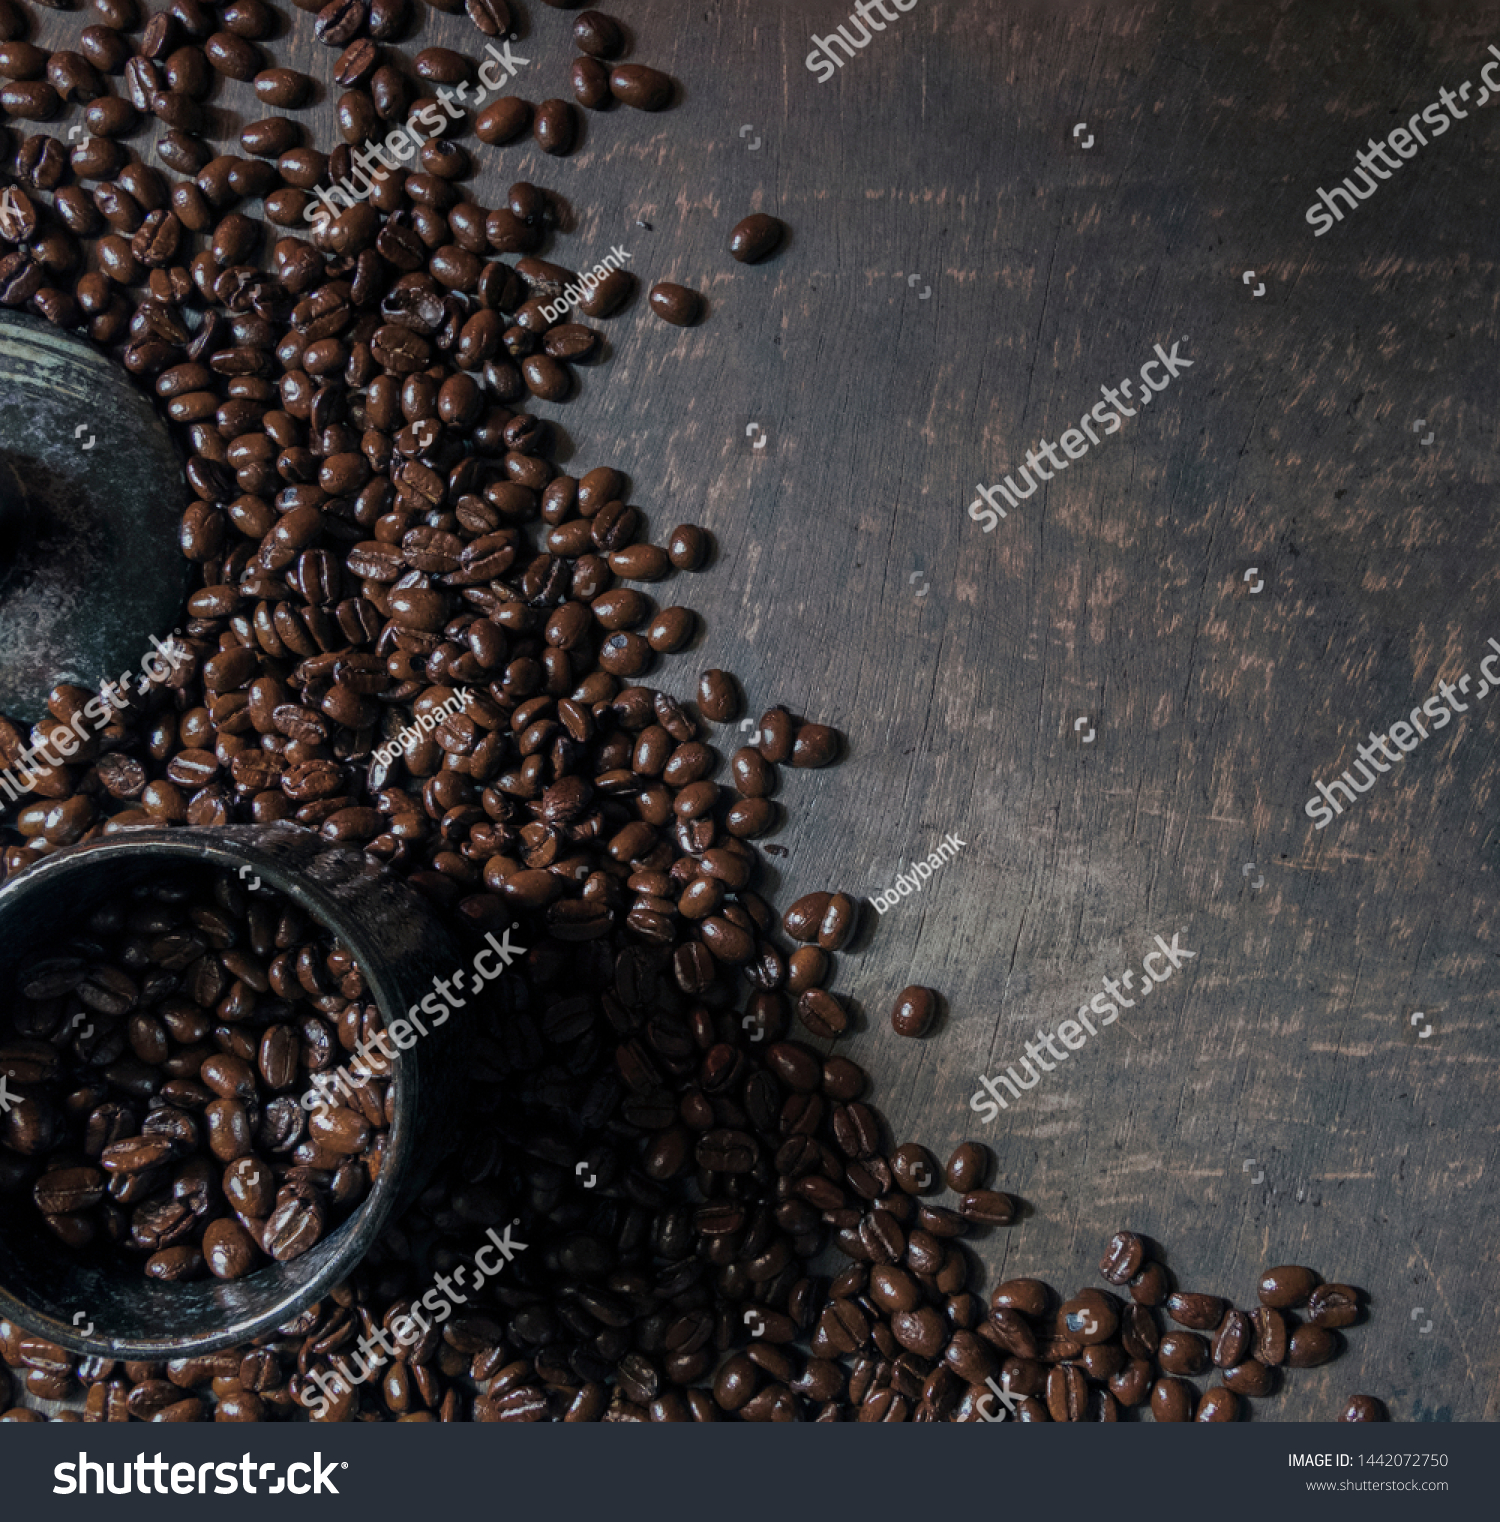 
Coffee cup and coffee beans on the wooden floor. Top view with copy space for your text #1442072750